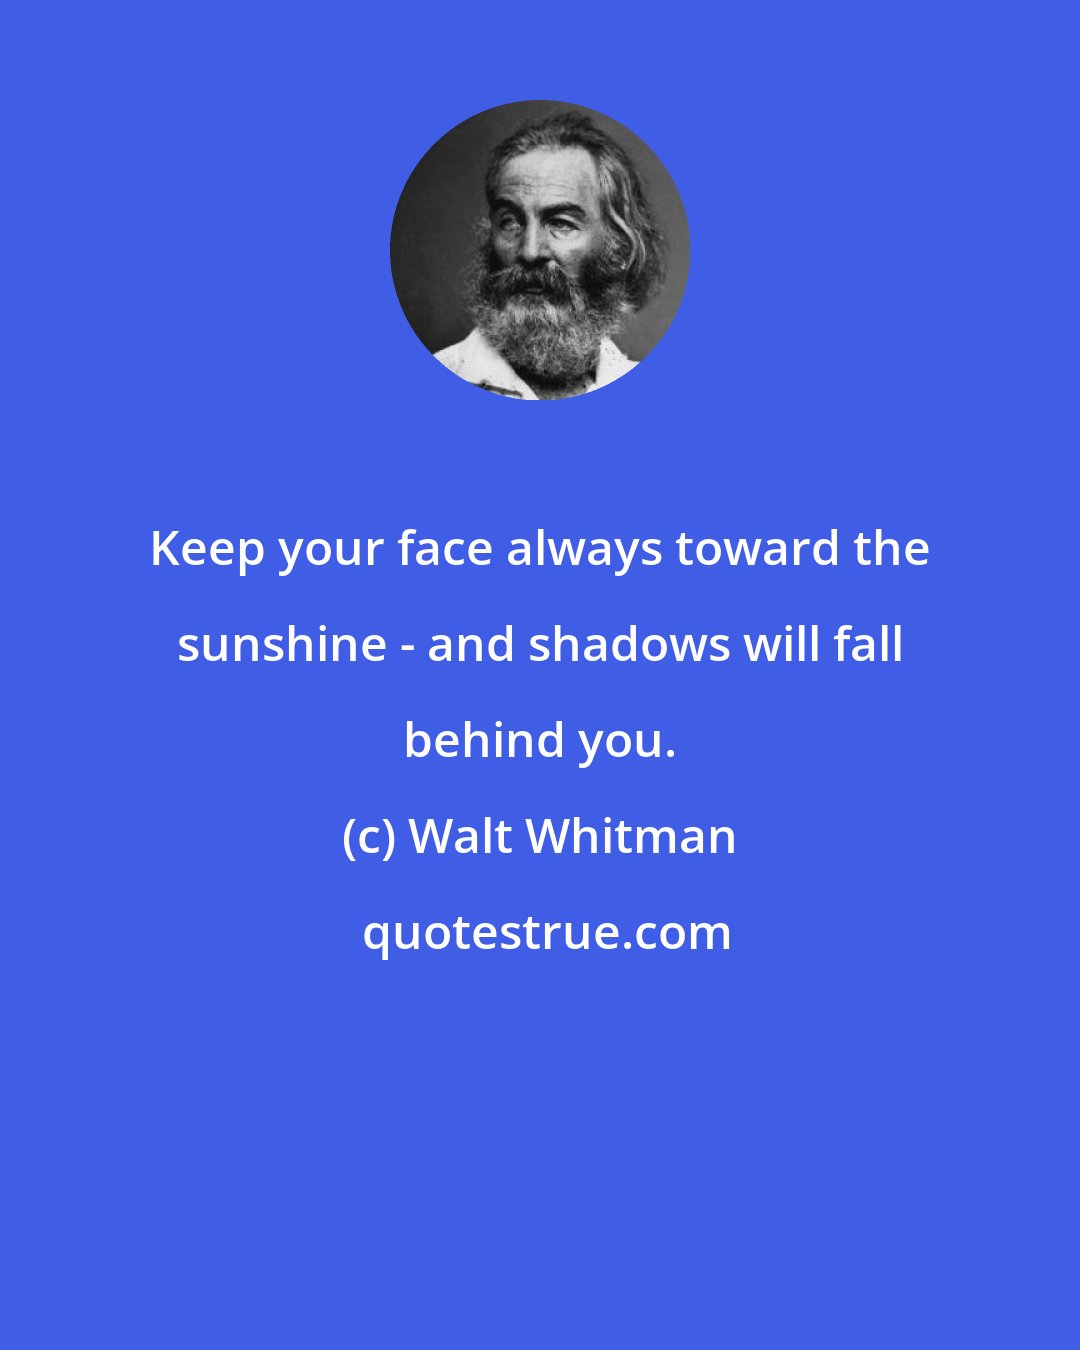 Walt Whitman: Keep your face always toward the sunshine - and shadows will fall behind you.